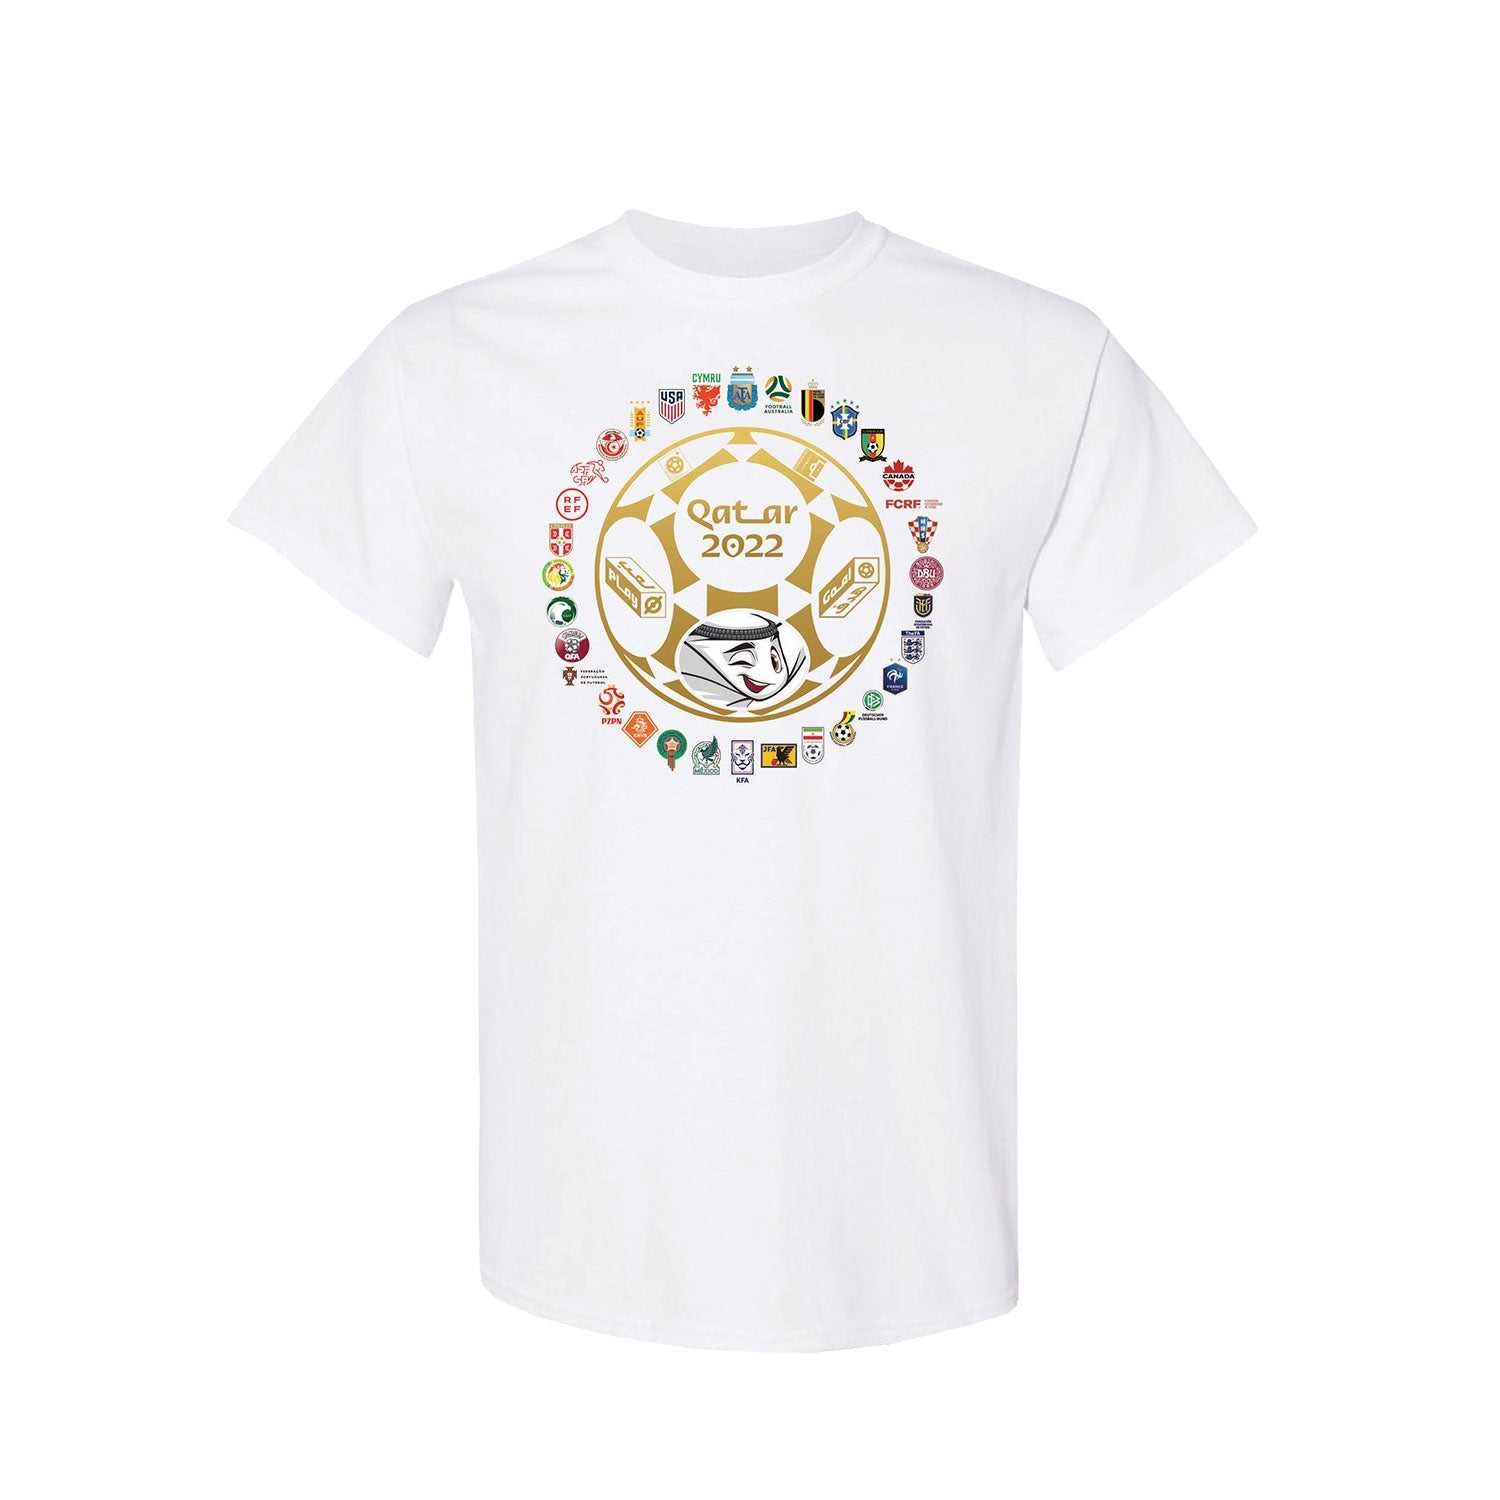 World Cup 2022 32 Federations Tee White - Women's